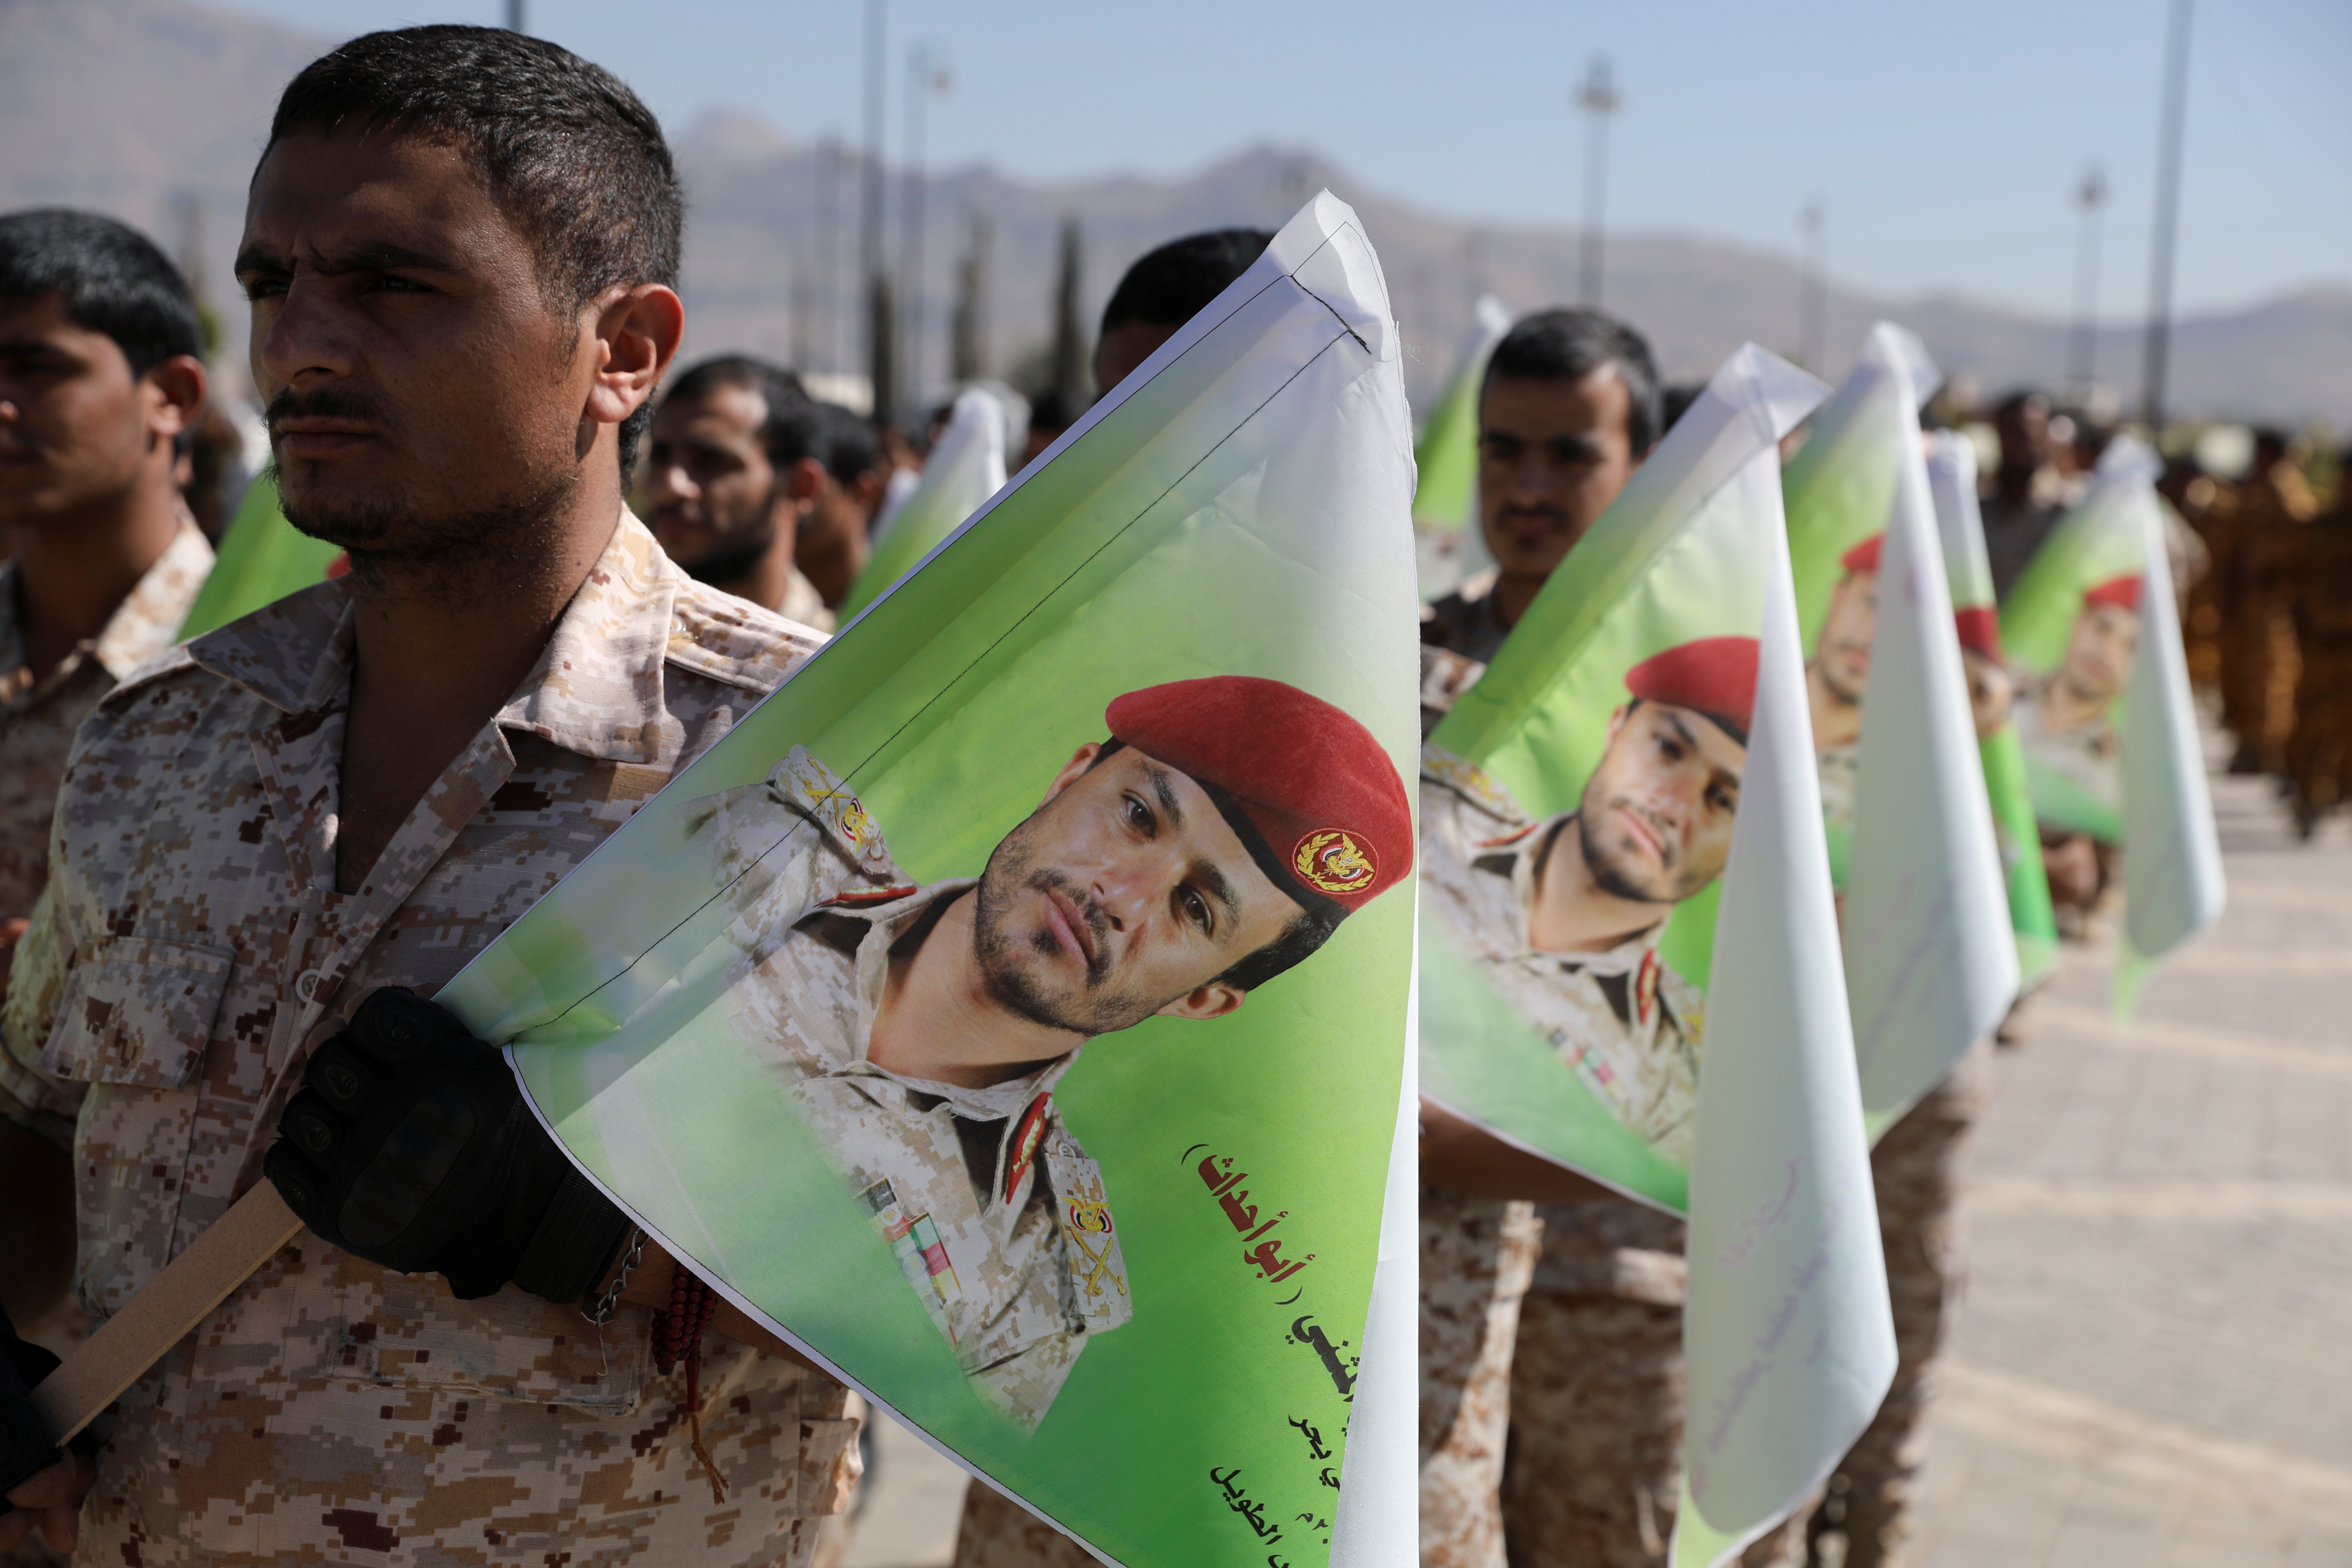 Newly recruited Houthi soldiers hold flags depicting a Houthi commander killed in recent fighting against government forces, during his funeral in Sanaa, Yemen December 6, 2021. REUTERS/Khaled Abdullah